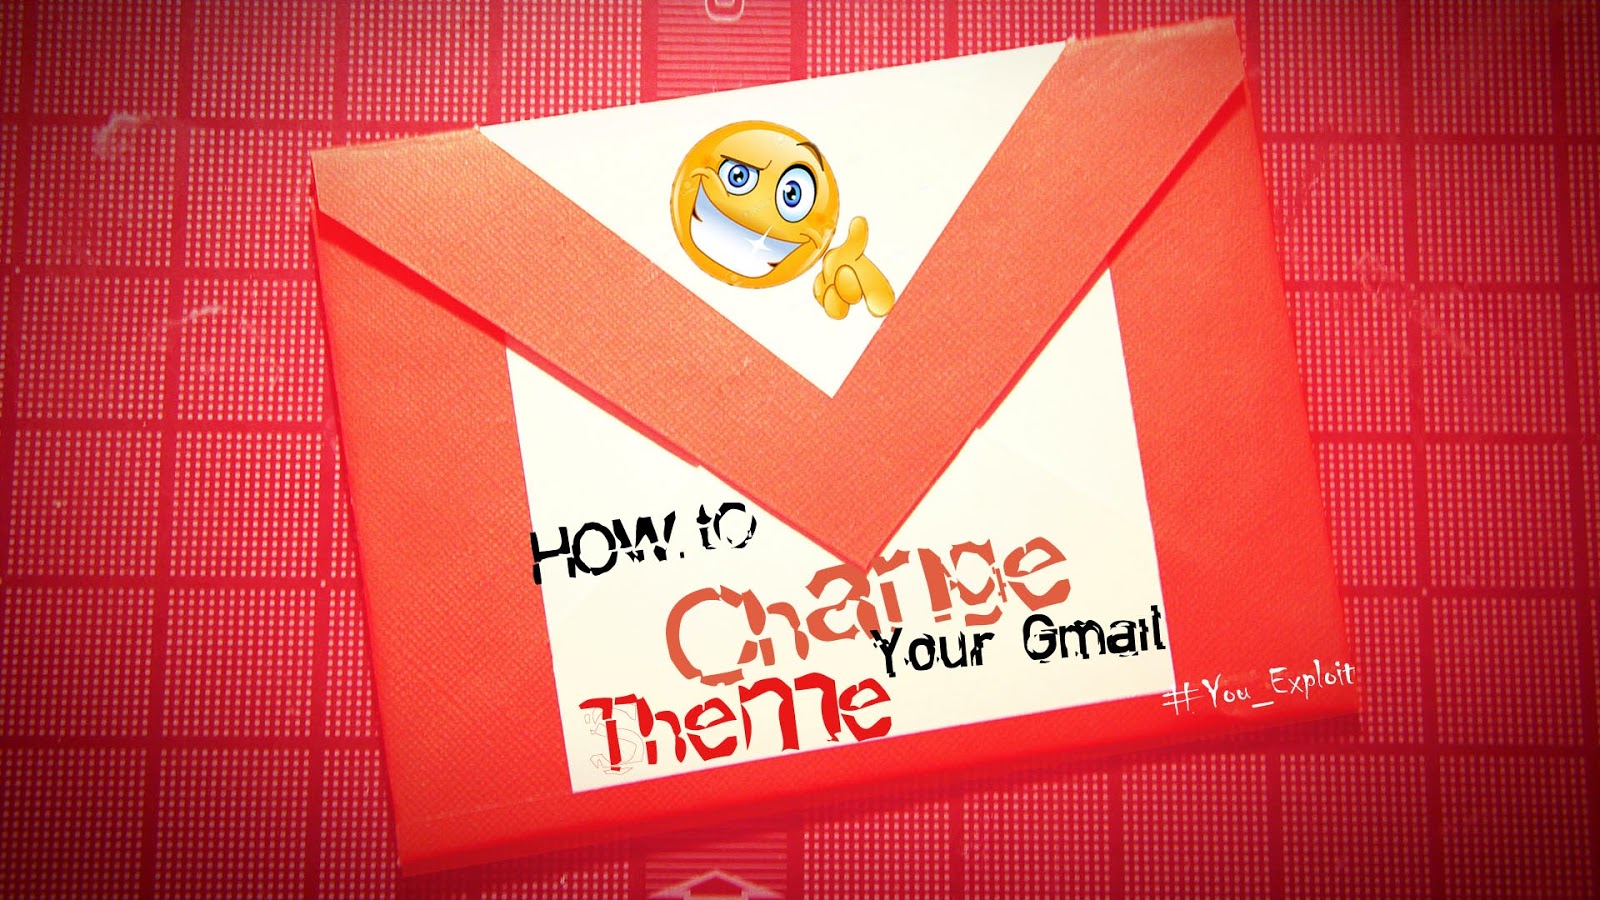 Gmail users, Here's how to Change your Gmail Theme ...